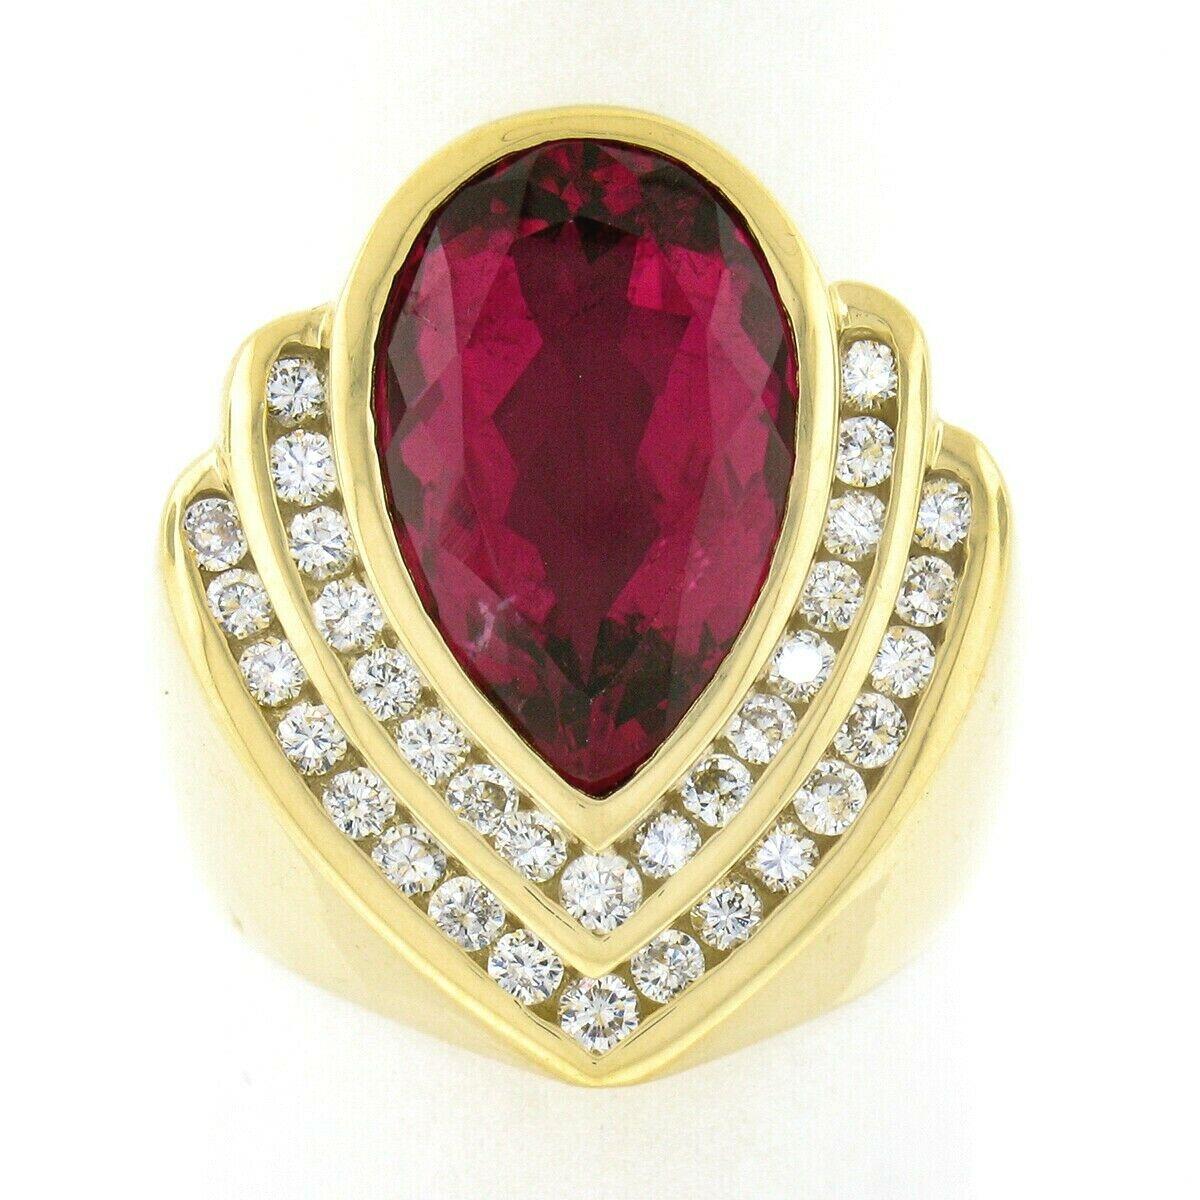 This magnificent vintage statement band ring was crafted from solid 18k yellow gold by Charles Krypell and features a large and absolutely stunning rubellite neatly bezel set at its top. The solitaire is pear brilliant cut and weighs approximately